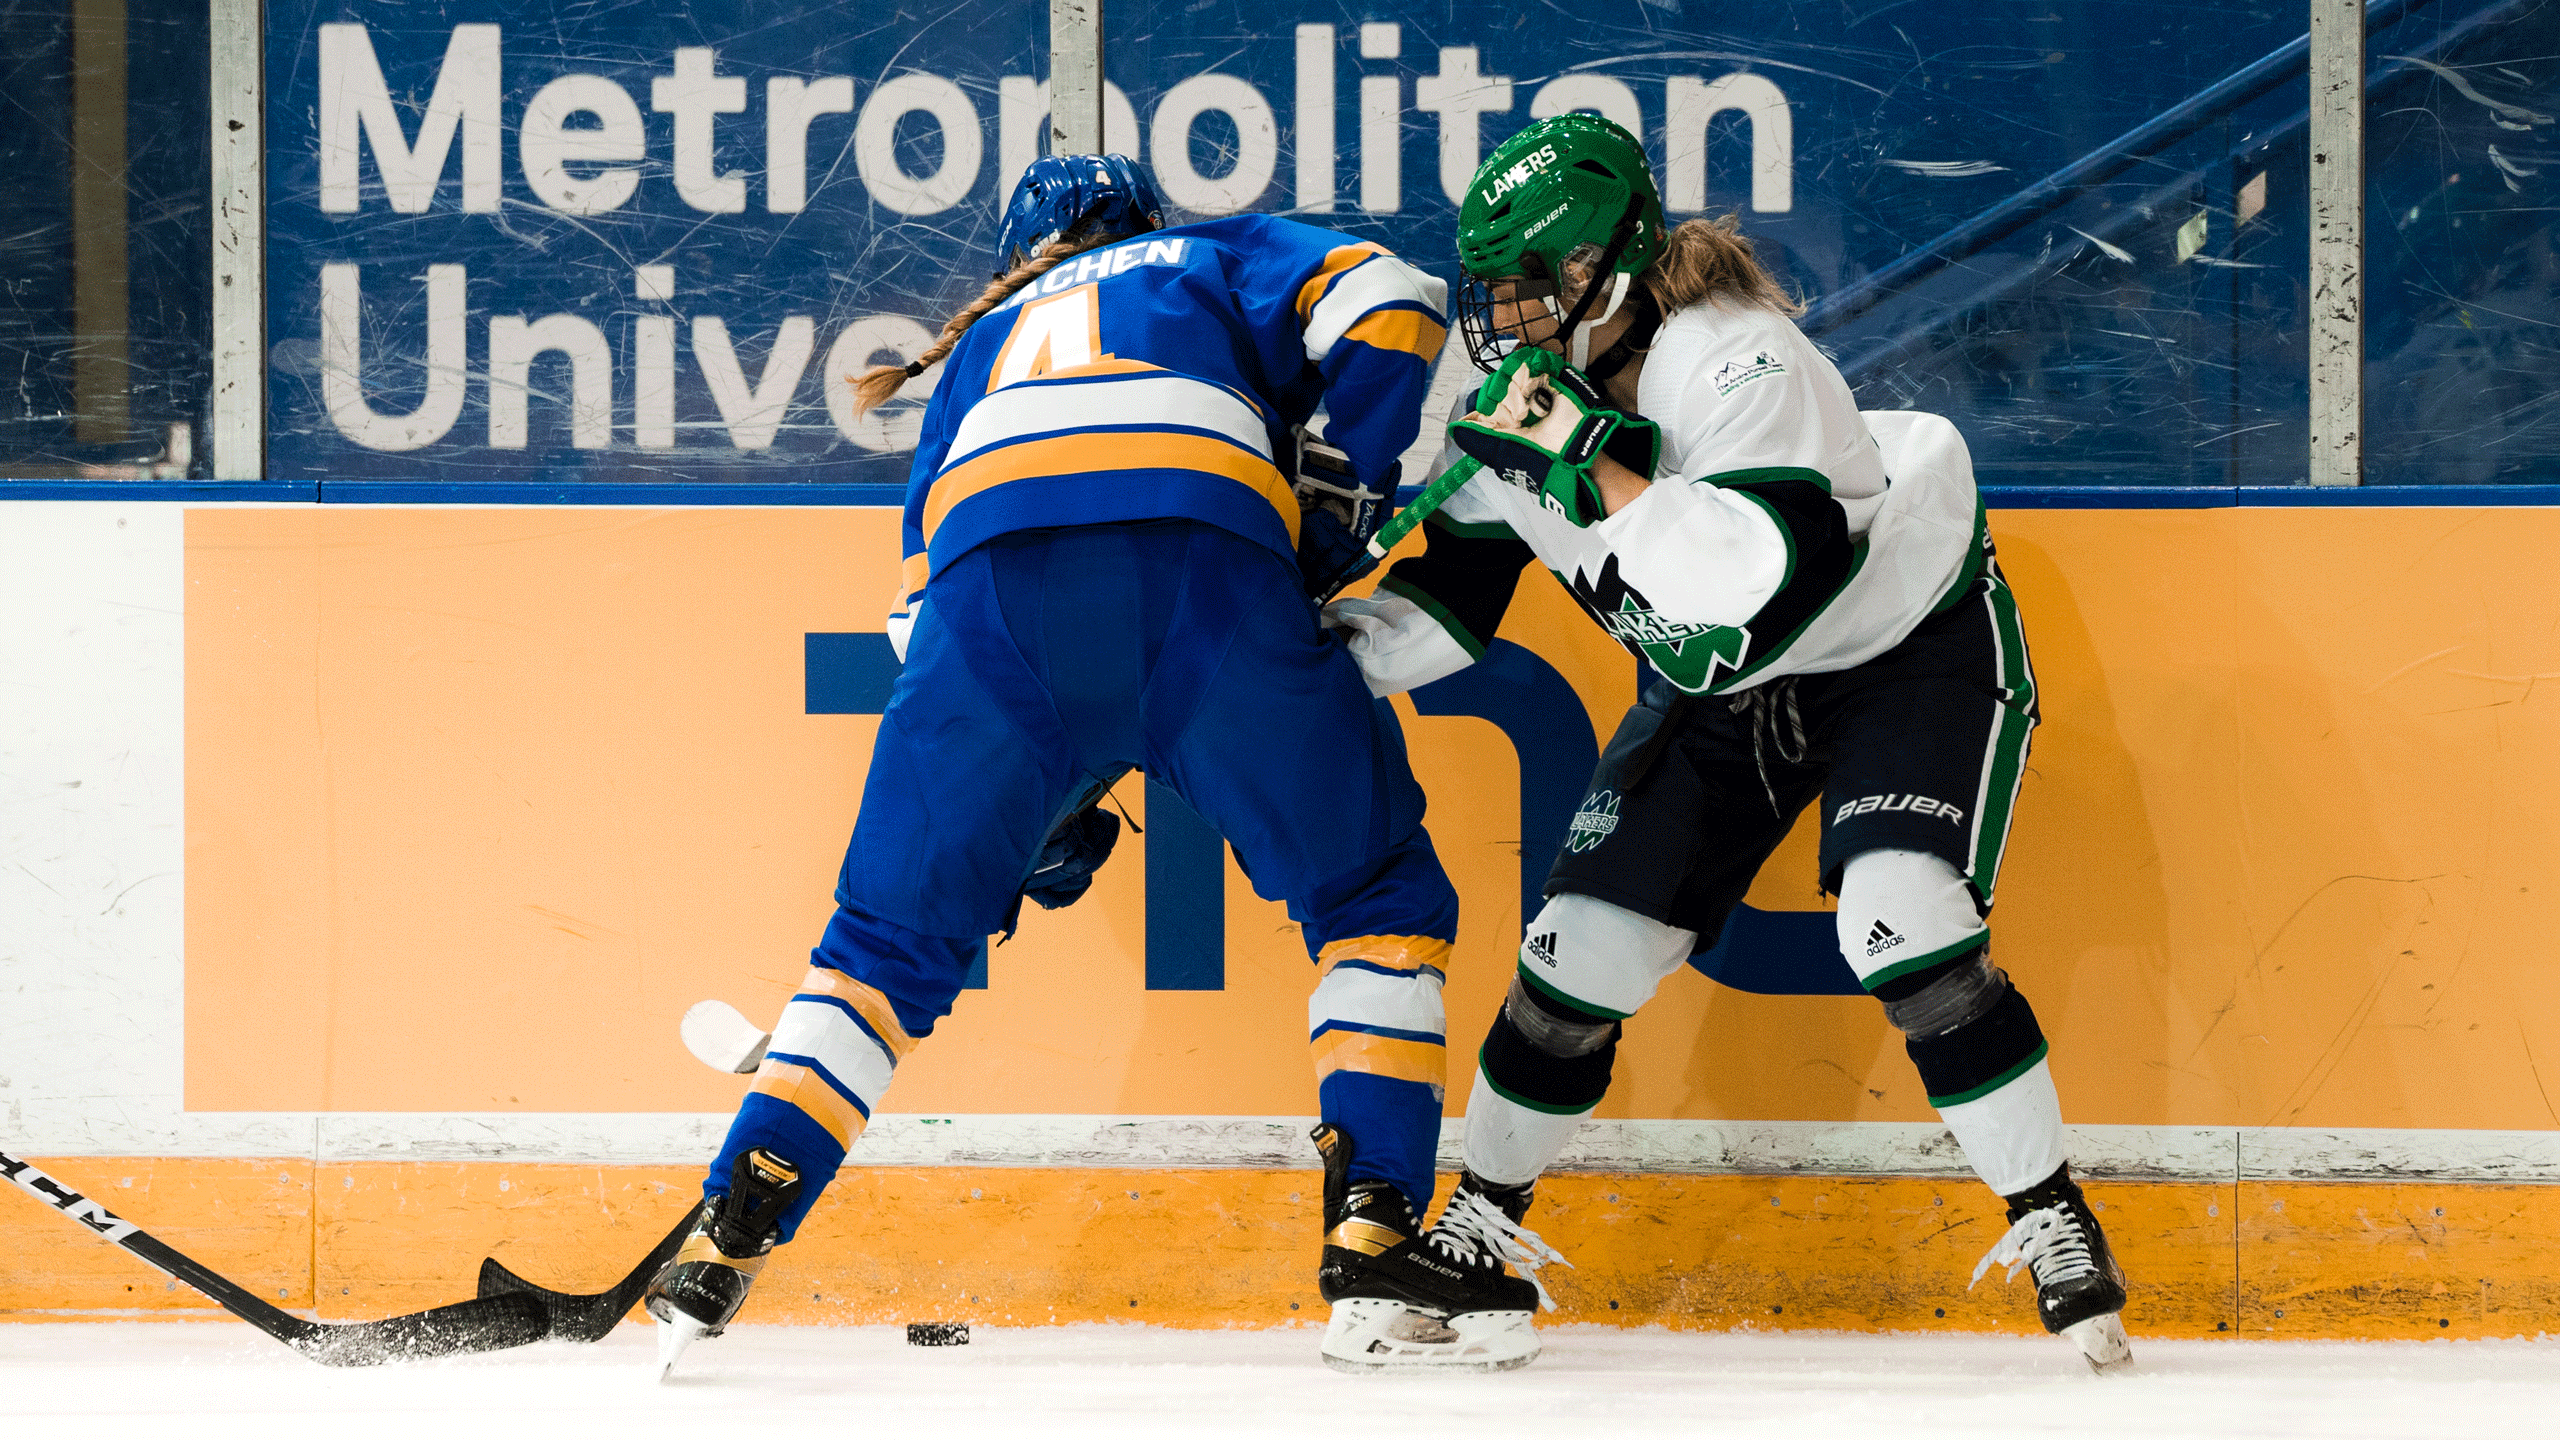 A hockey player in a blue jersey fights for the puck